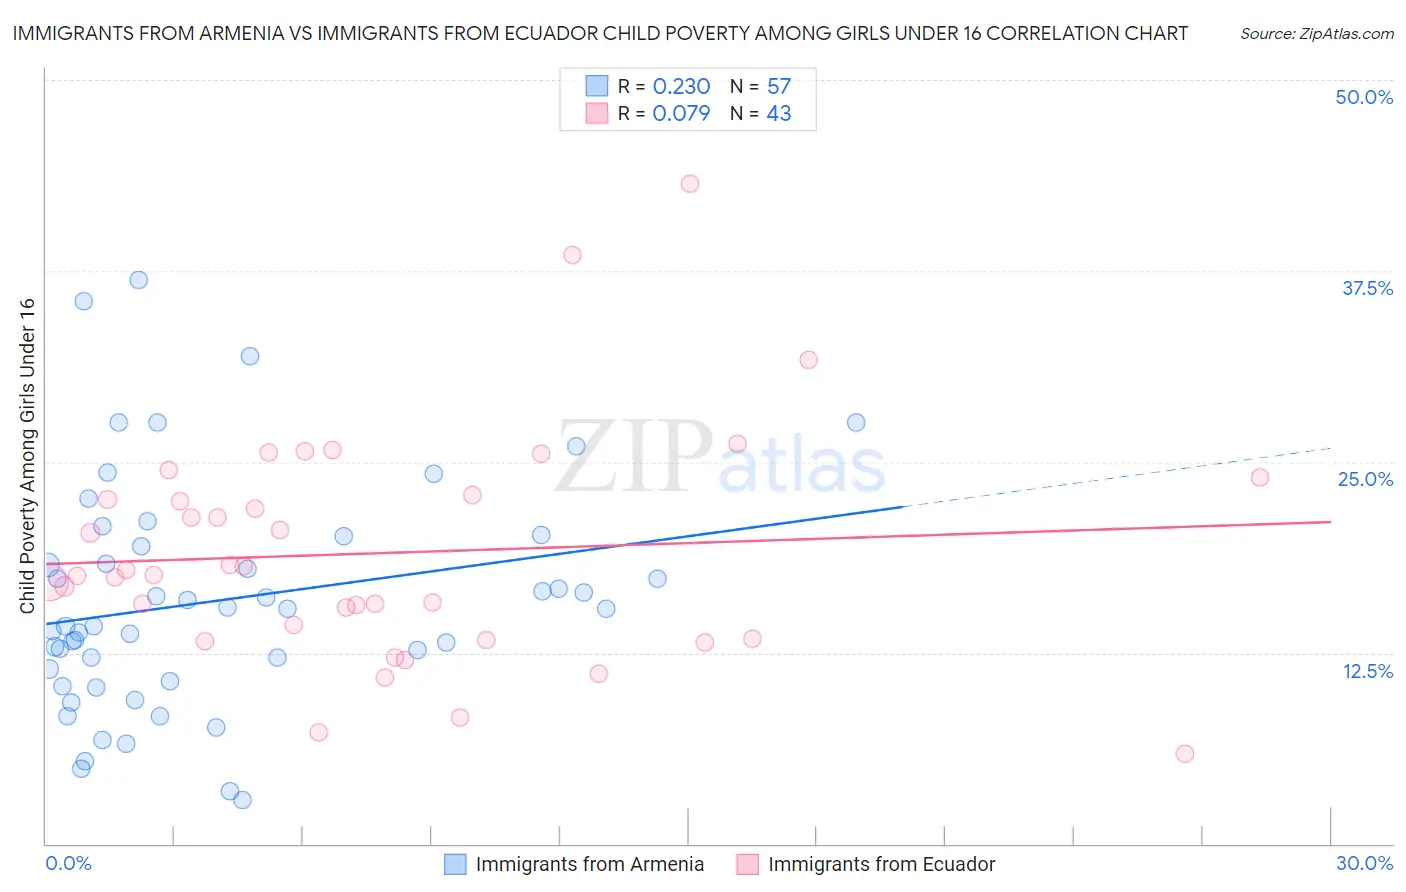 Immigrants from Armenia vs Immigrants from Ecuador Child Poverty Among Girls Under 16